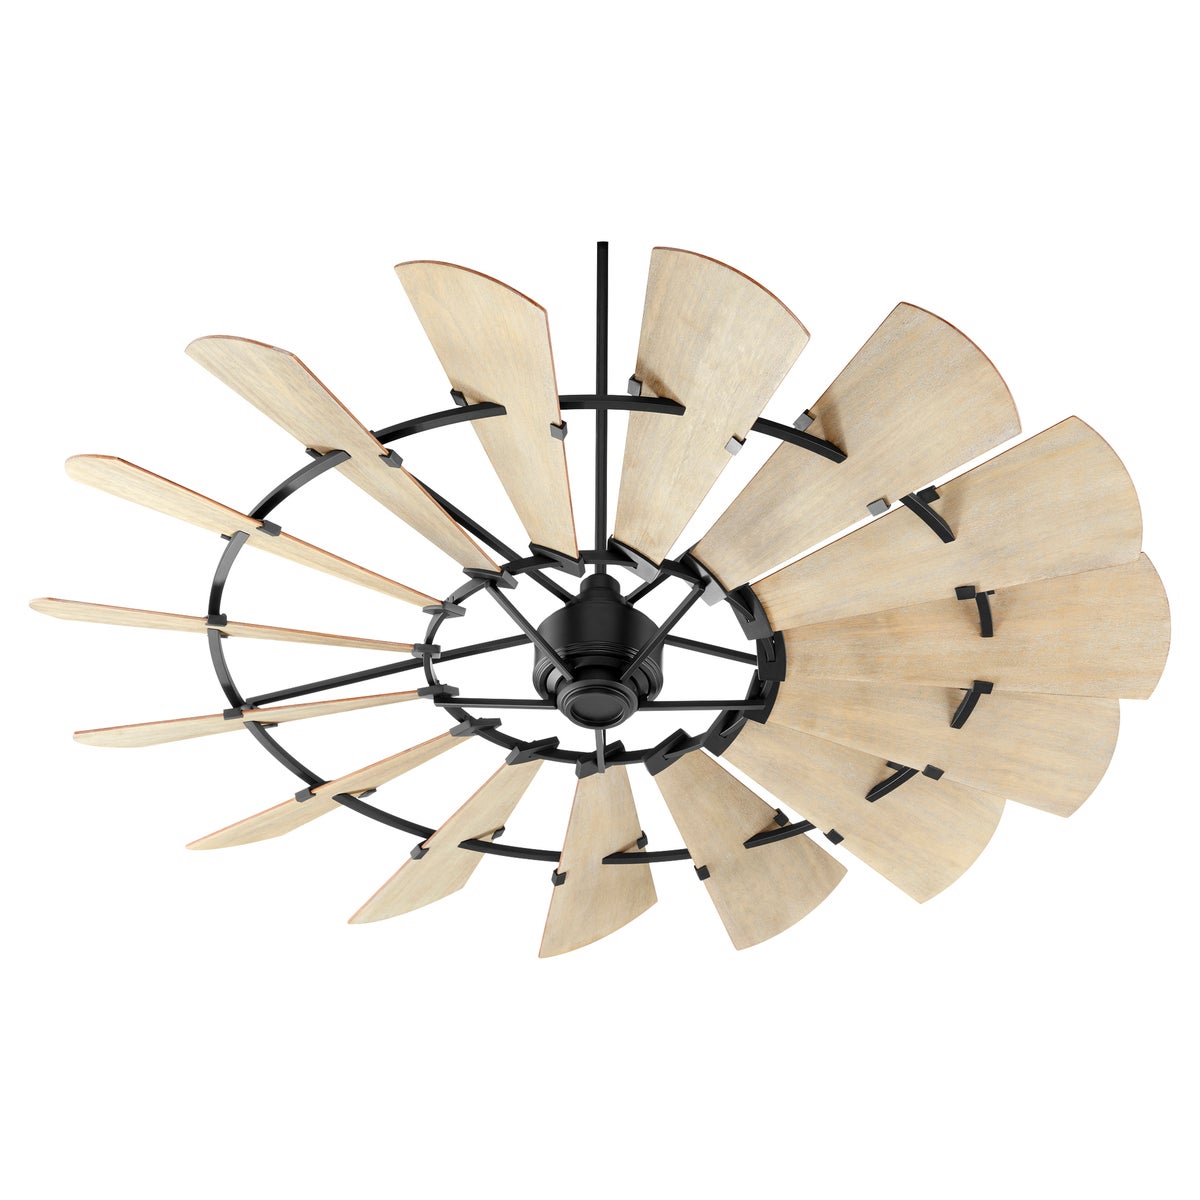 Farmhouse Ceiling Fan with 15 wooden blades in weathered oak finish, rustic design inspired by outdoor windmills. Quorum International DC-165L motor, UL Listed, Dry Location safety rating. Dimensions: 16.5"H x 72"W. Limited Lifetime warranty.